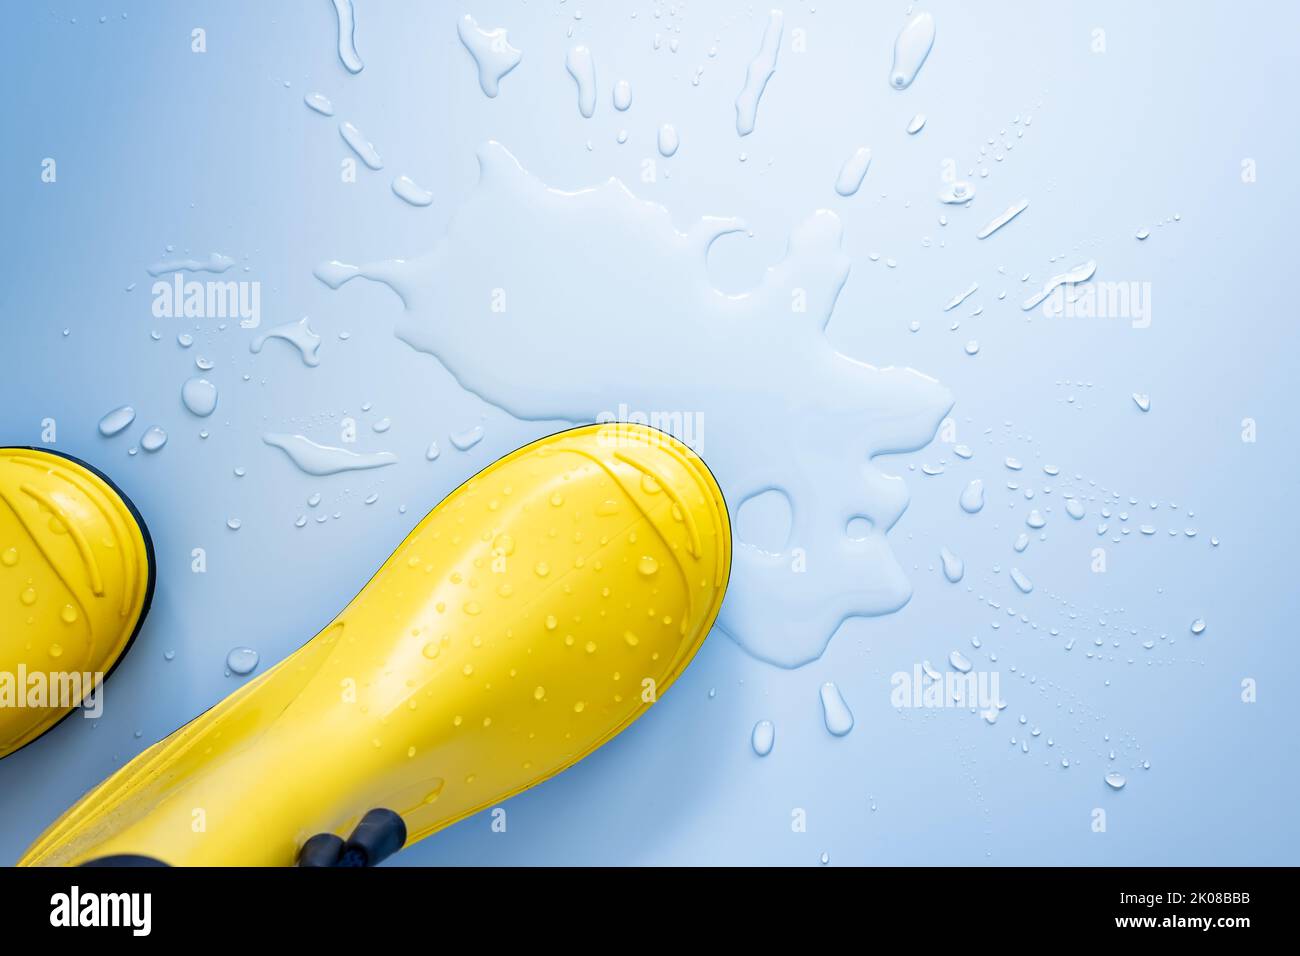 Rubber boots of yellow color stand in a puddle of water on a blue background. Copy space. Flat lay. Top view.  Stock Photo